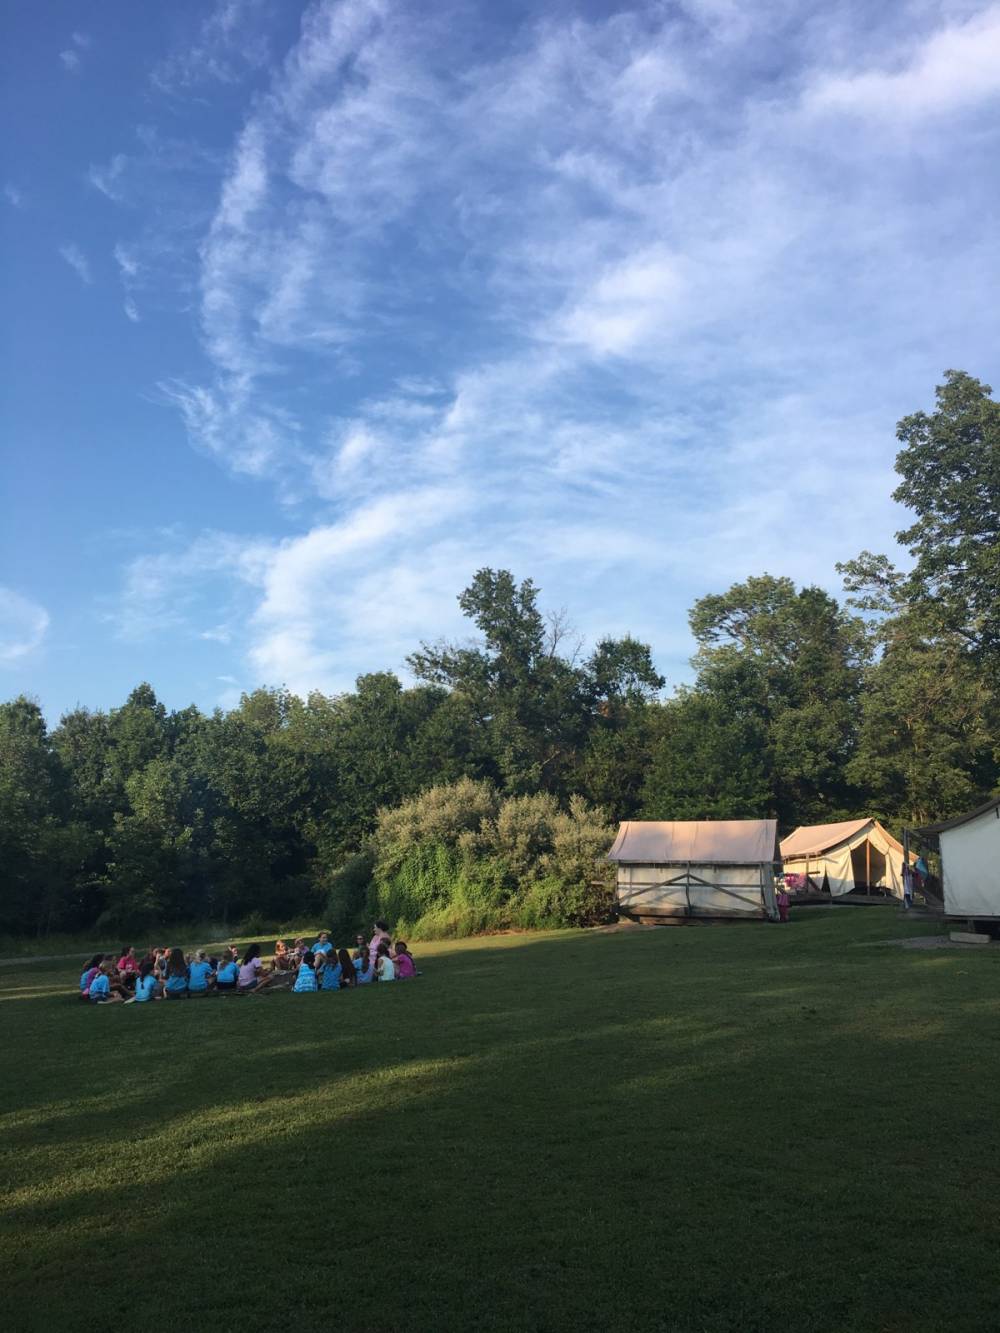 TOP NEW JERSEY LEADERSHIP CAMP: Camp Agnes DeWitt is a Top Leadership Summer Camp located in Hillsborough New Jersey offering many fun and enriching Leadership and other camp programs. Camp Agnes DeWitt also offers CIT/LIT and/or Teen Leadership Opportunities, too.